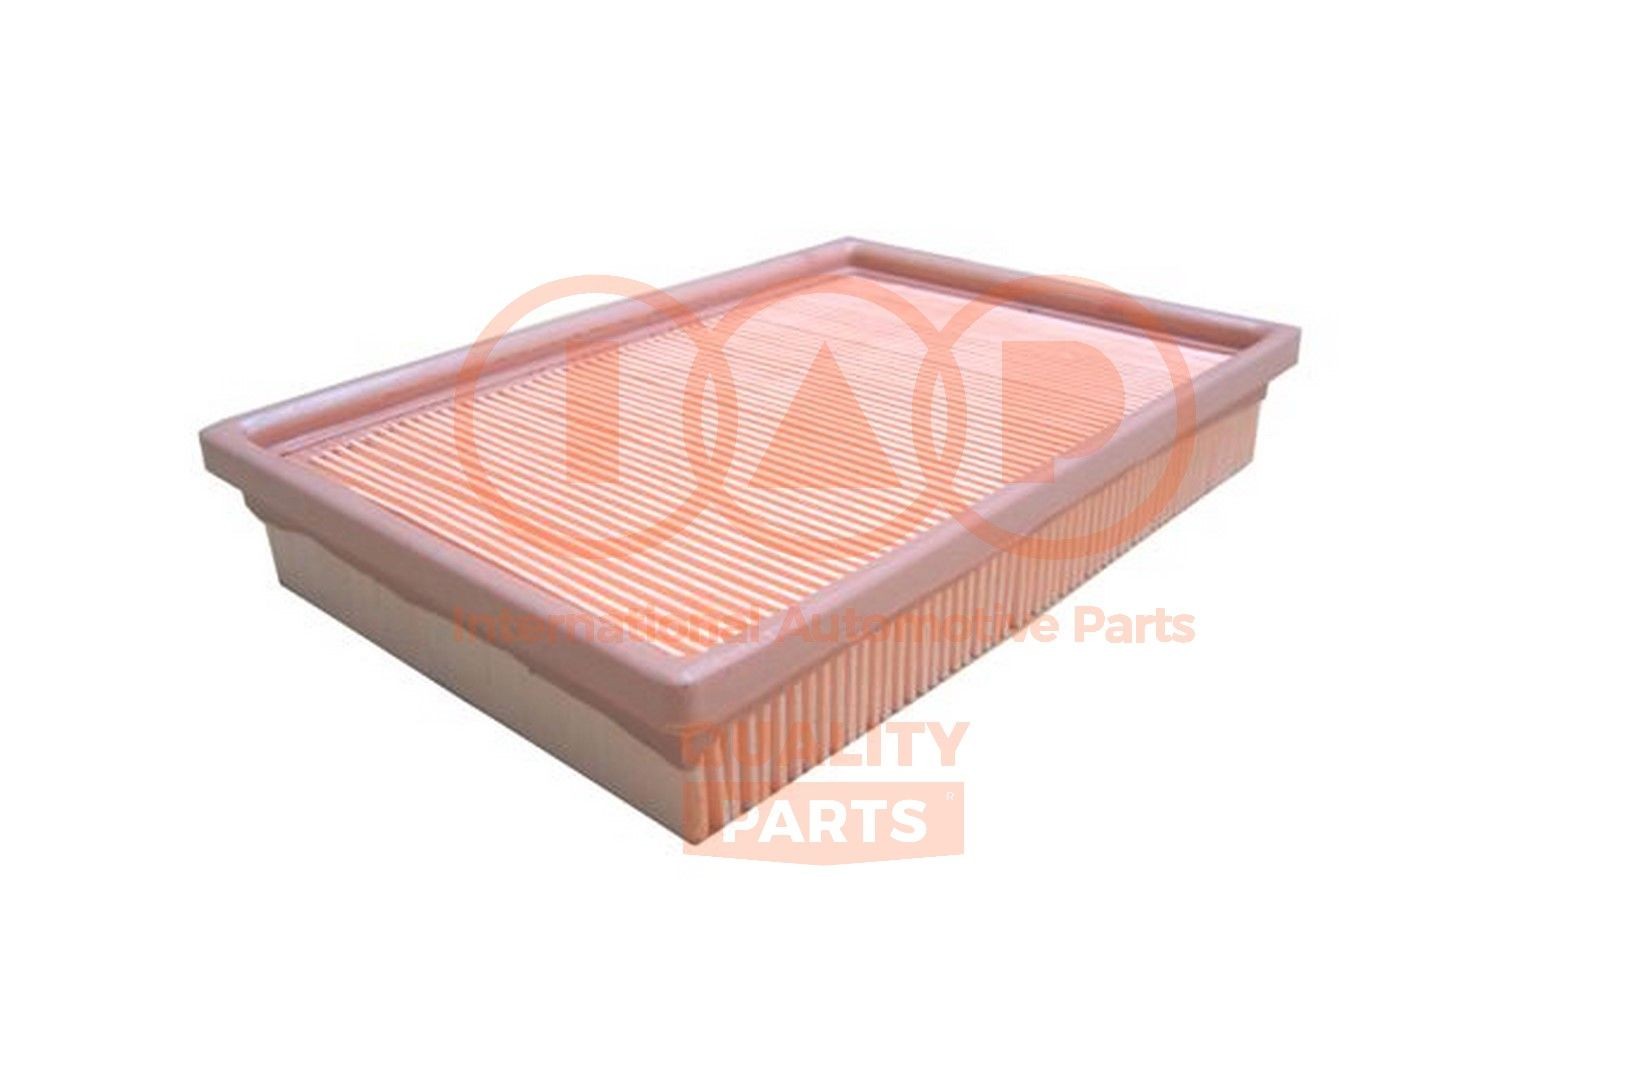 IAP QUALITY PARTS 40mm, 168mm, 250mm, Filter Insert Length: 250mm, Width: 168mm, Height: 40mm Engine air filter 121-07051 buy